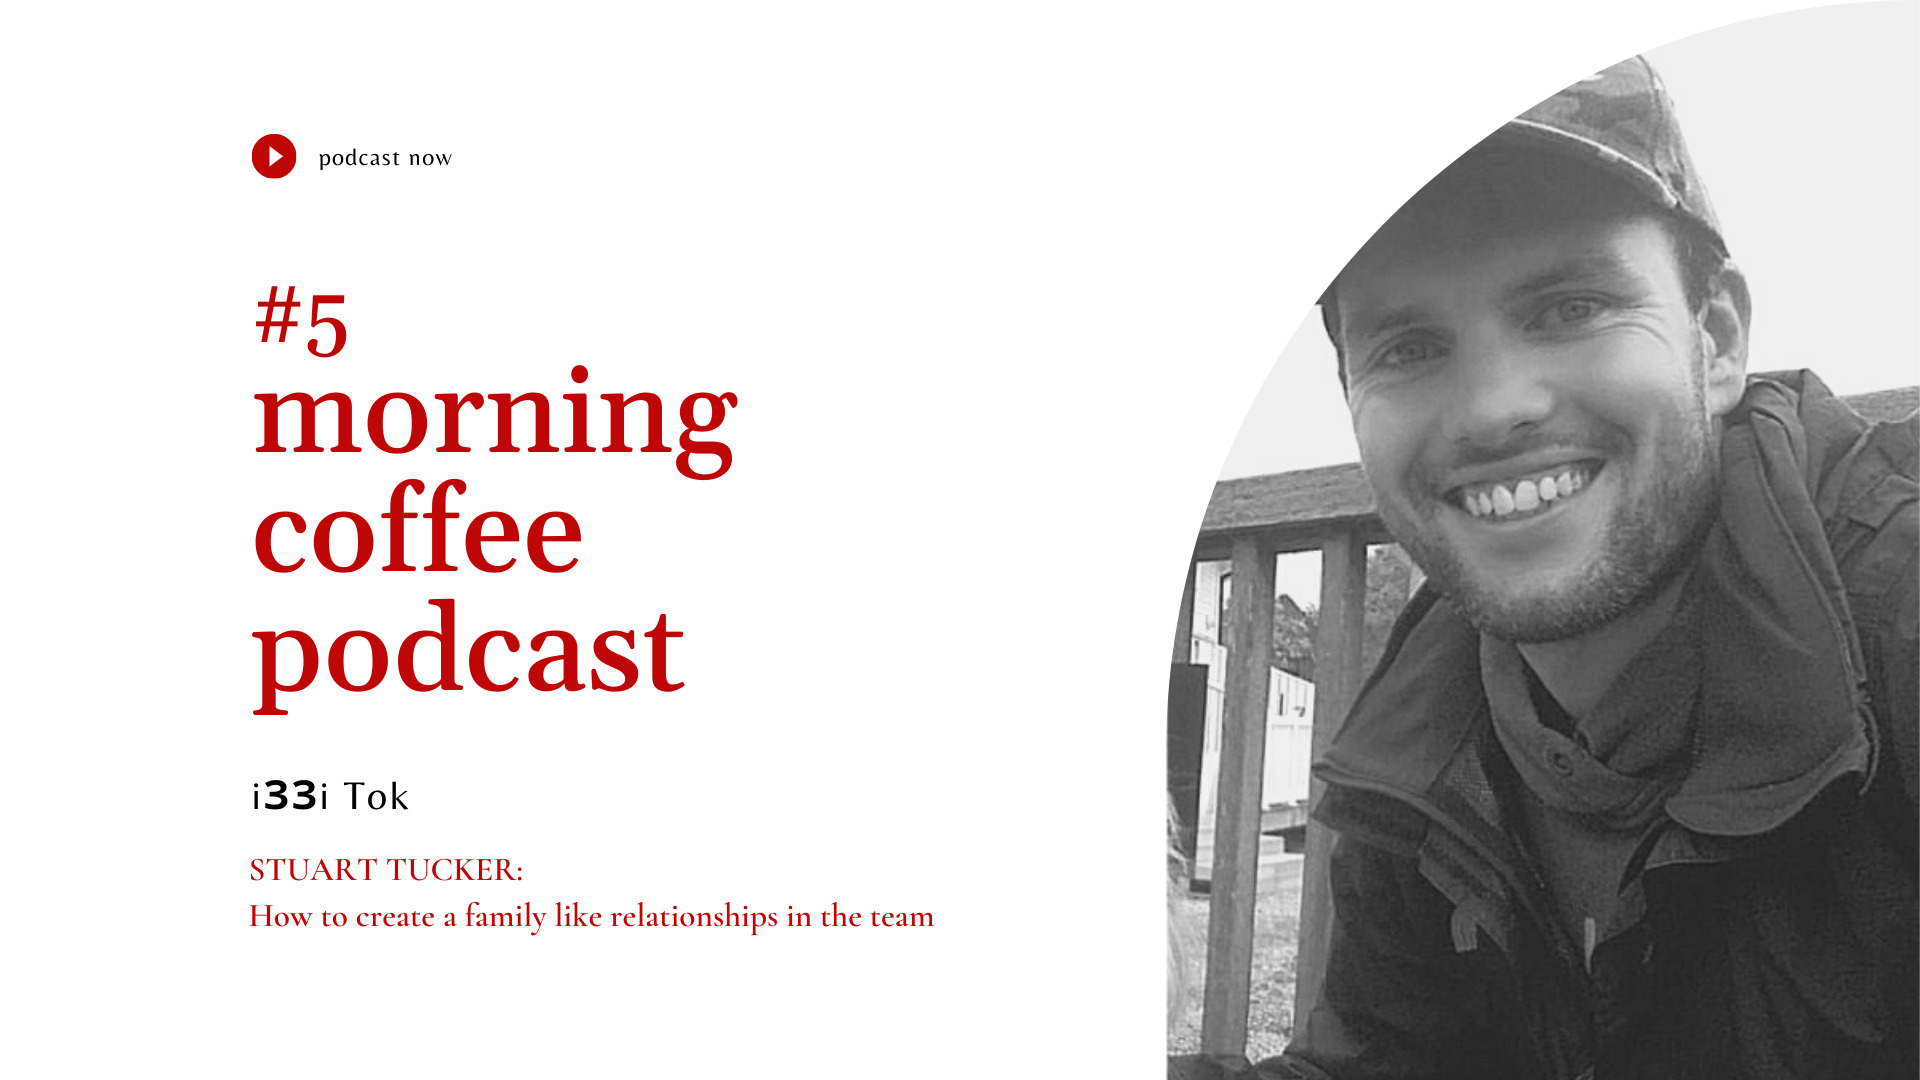 Morning Coffee Podcast _ CTj podcasts #5